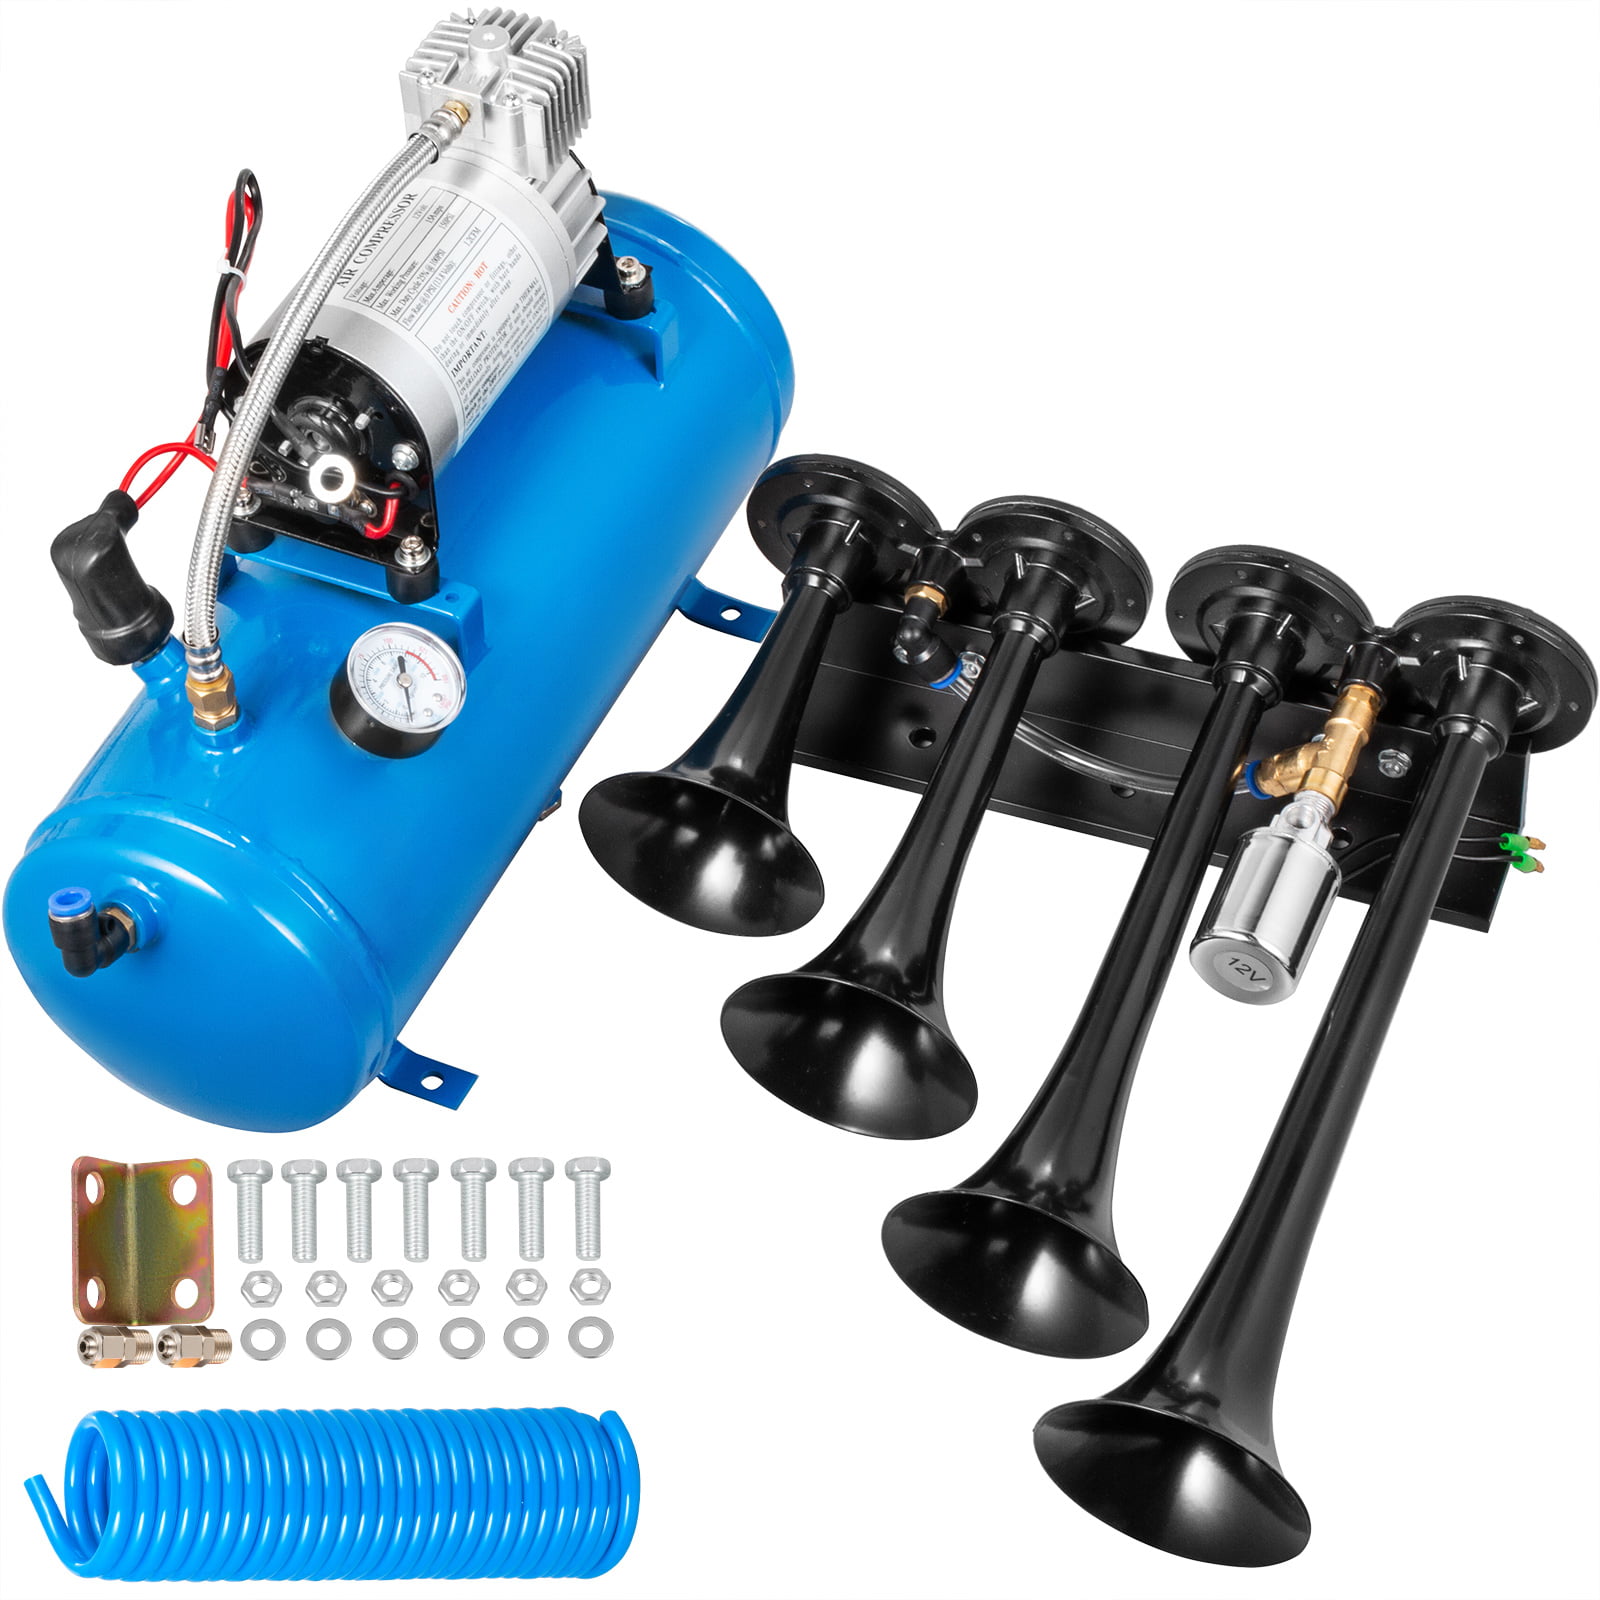 MKING Train Air Horn，4 Trumpet Air Horn，Super Loud 150DB 12V Electric Trains Horns for Vehicles,Air horn kit for Any 12V Vehicles Trucks Boats Cars and Vans|Without Air Compressor 